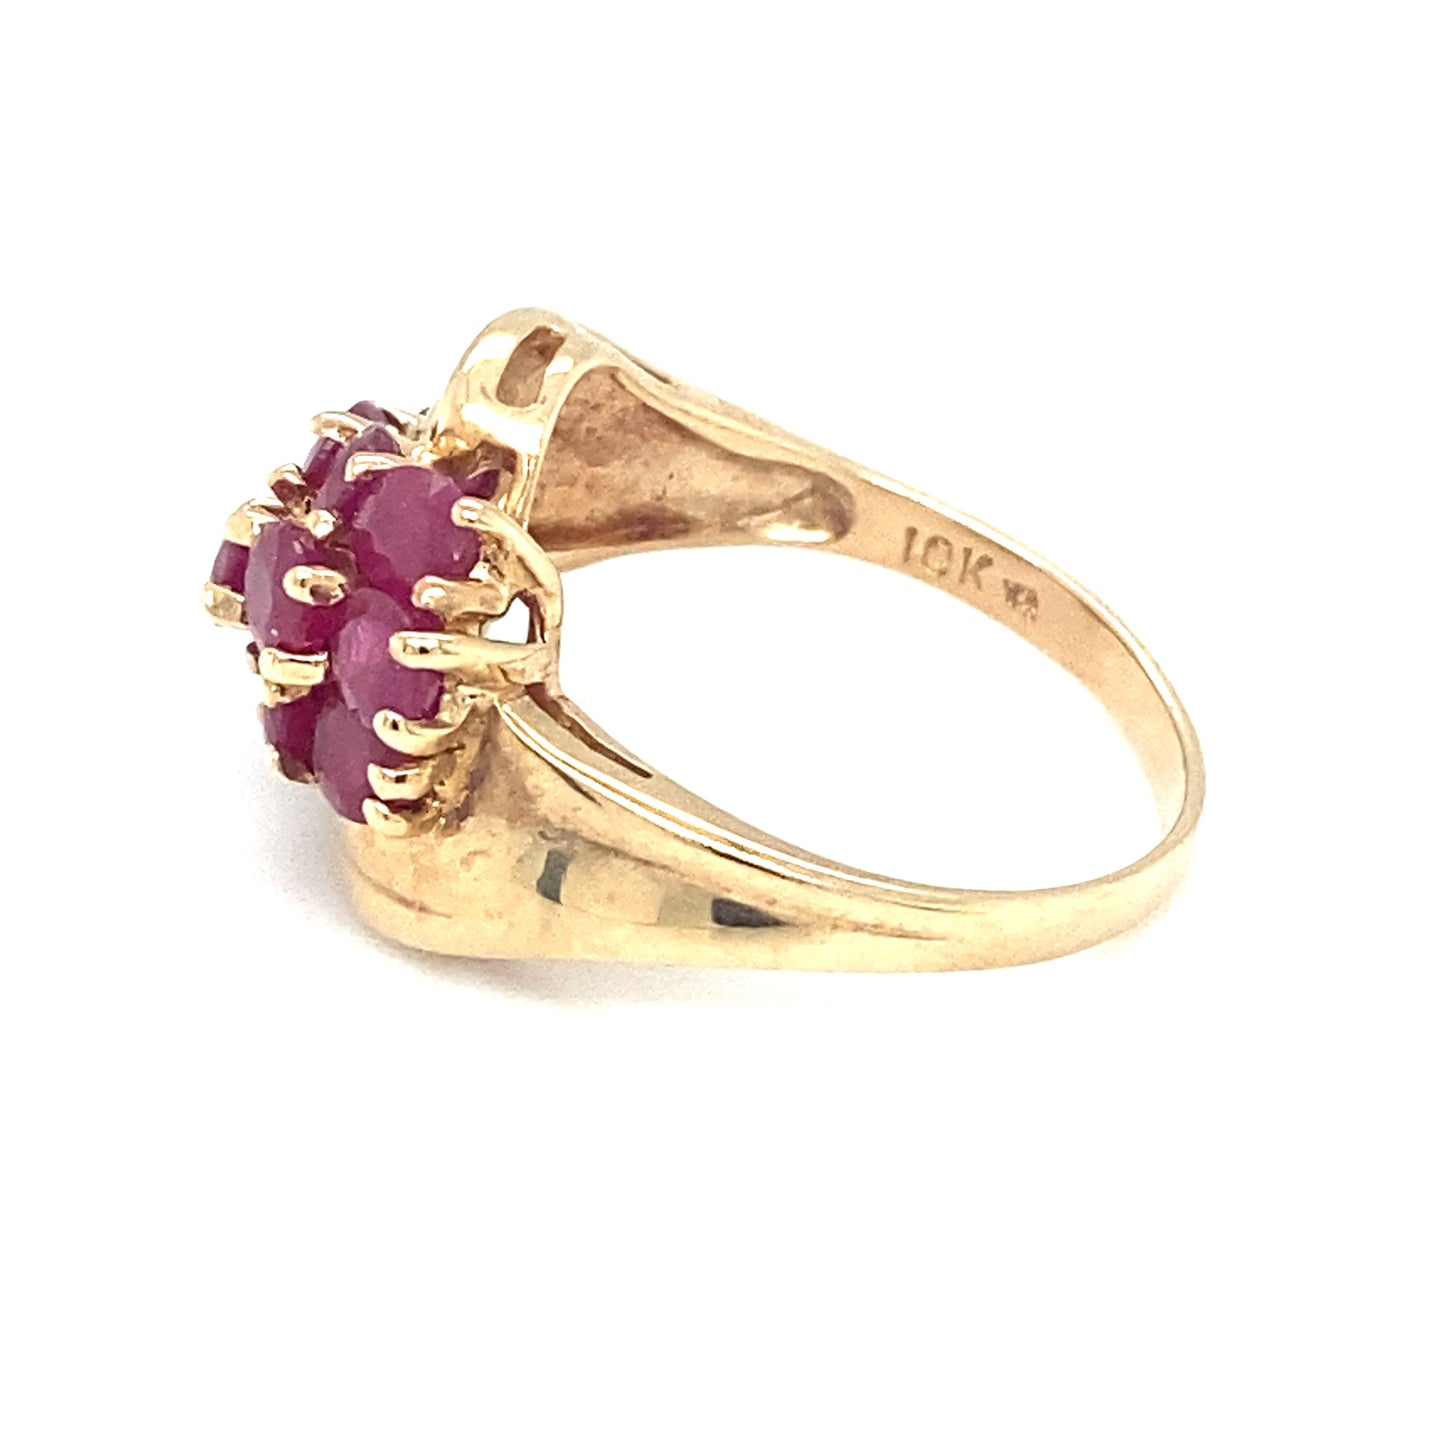 Circa 1960s Three Row Ruby Cocktail Ring in 10K Gold